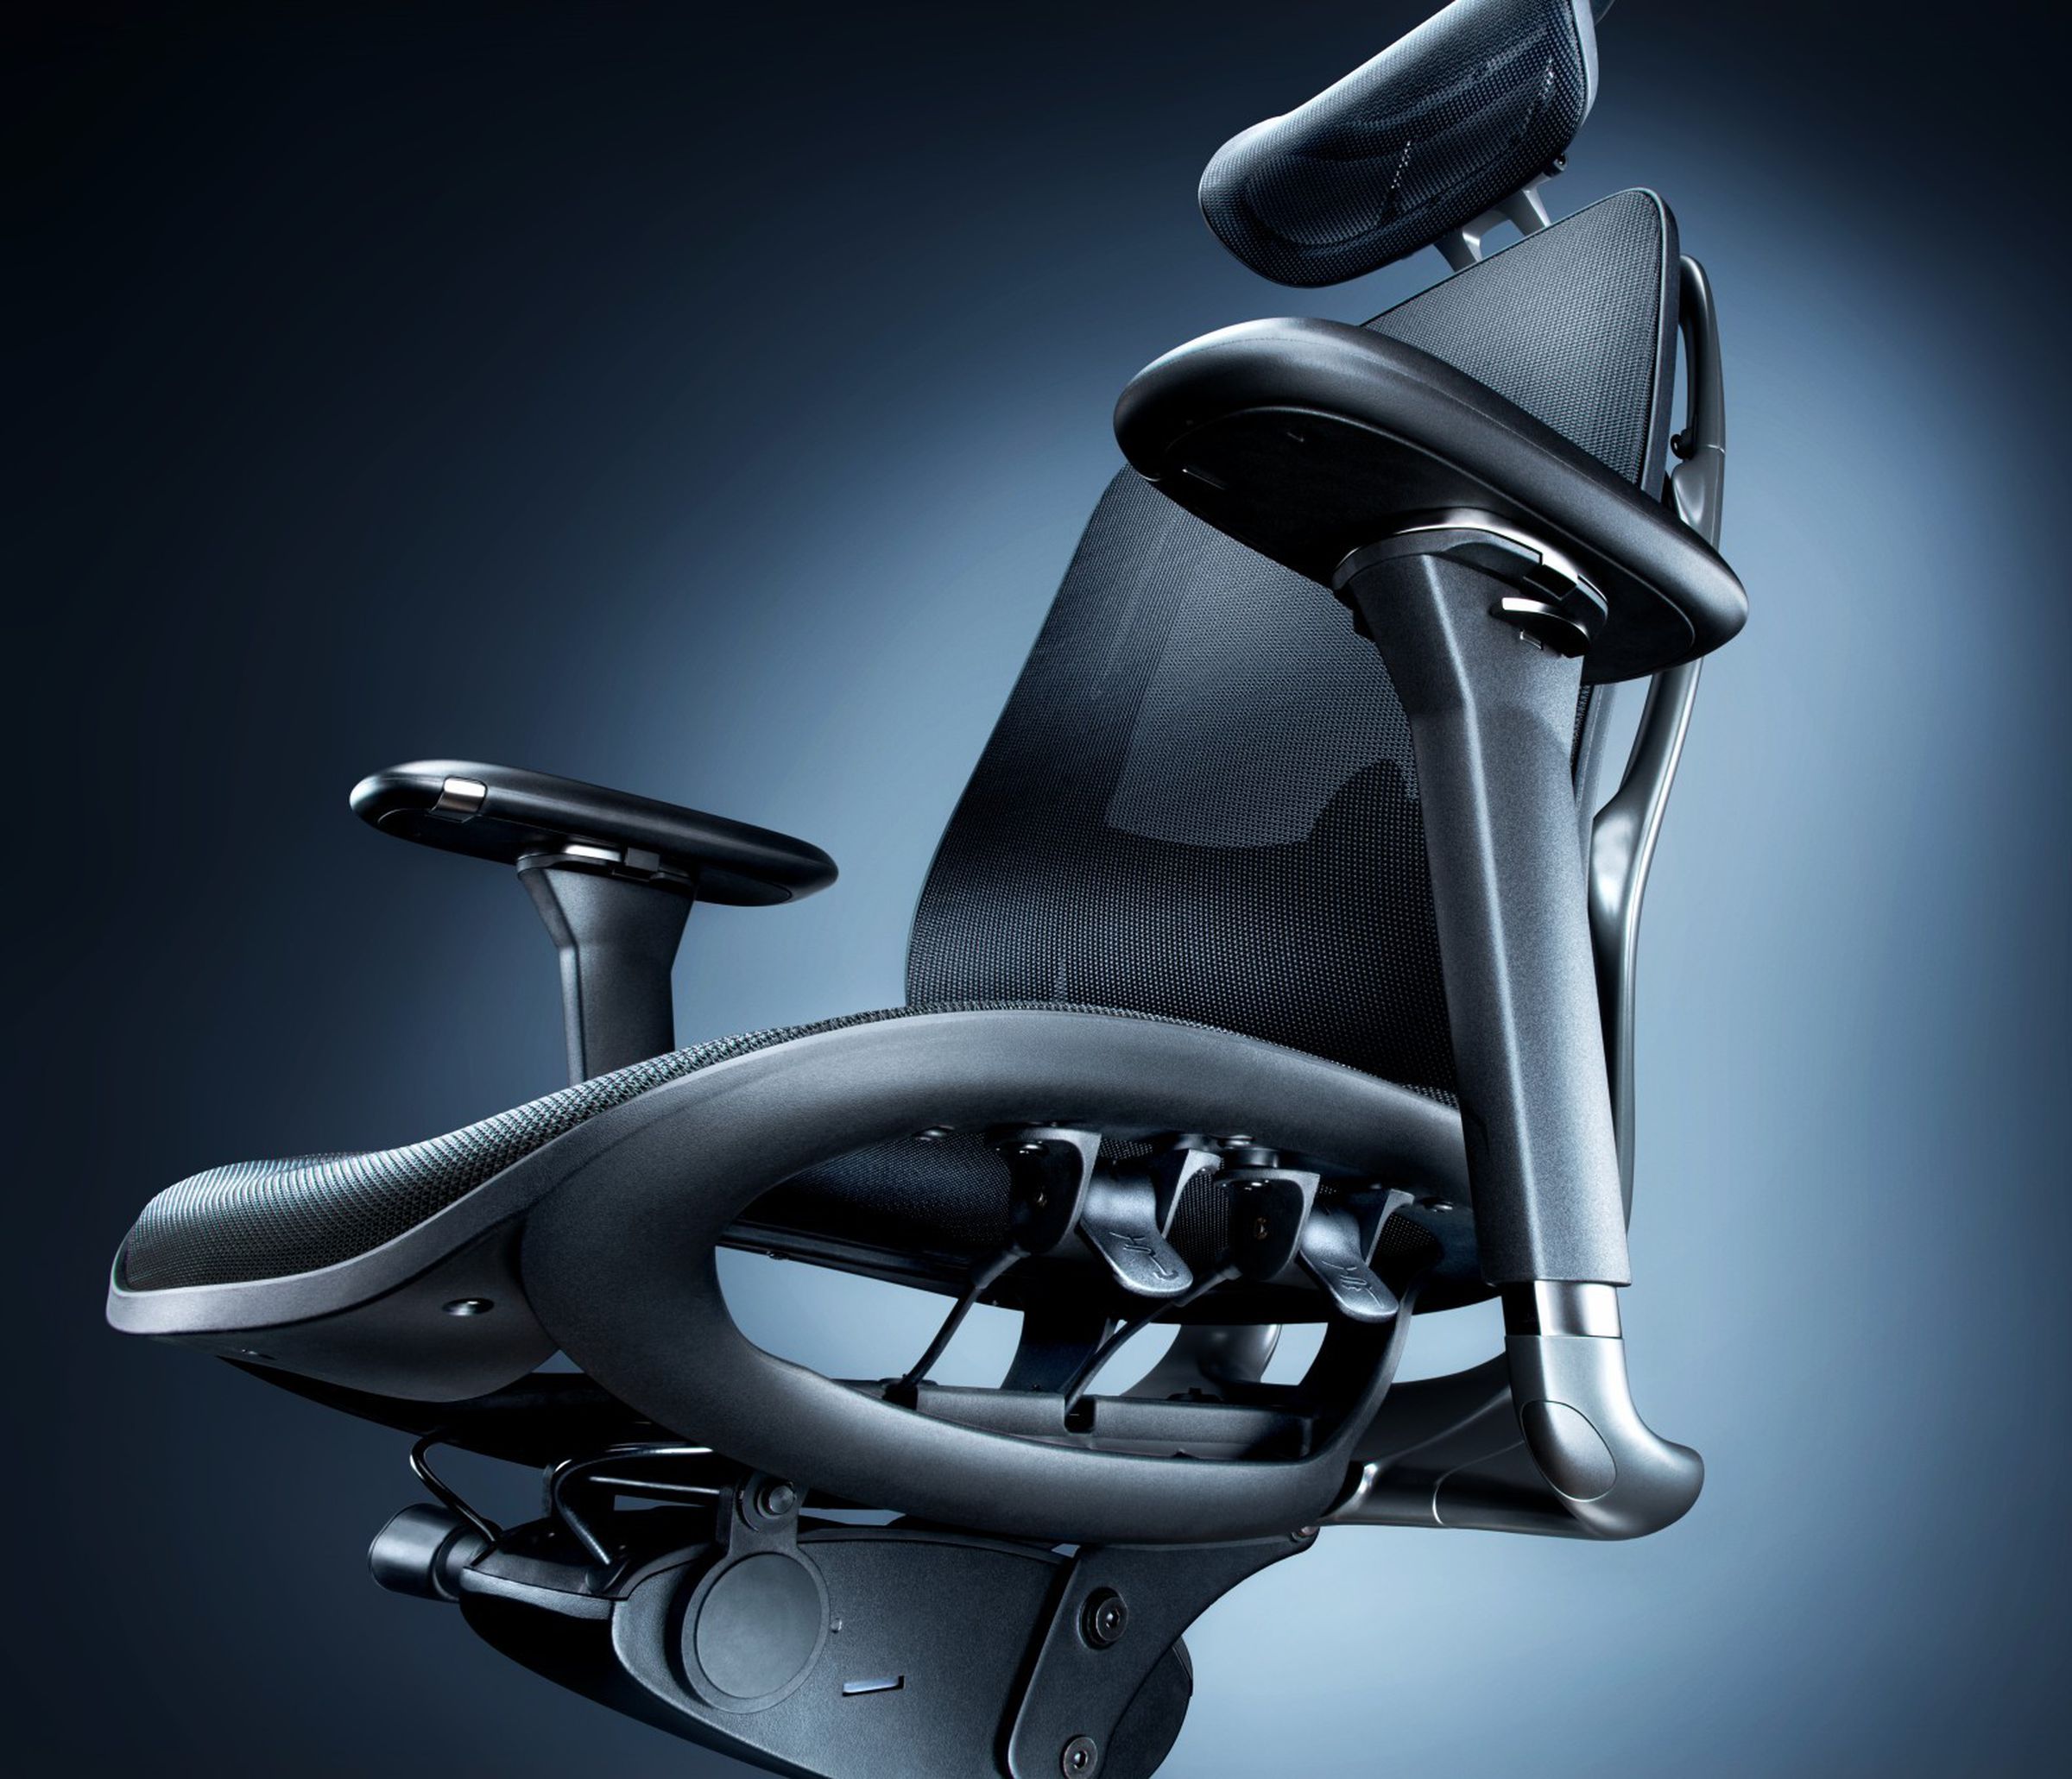 The Fujin Pro’s recline is supposed to move with your body, like the Aeron.